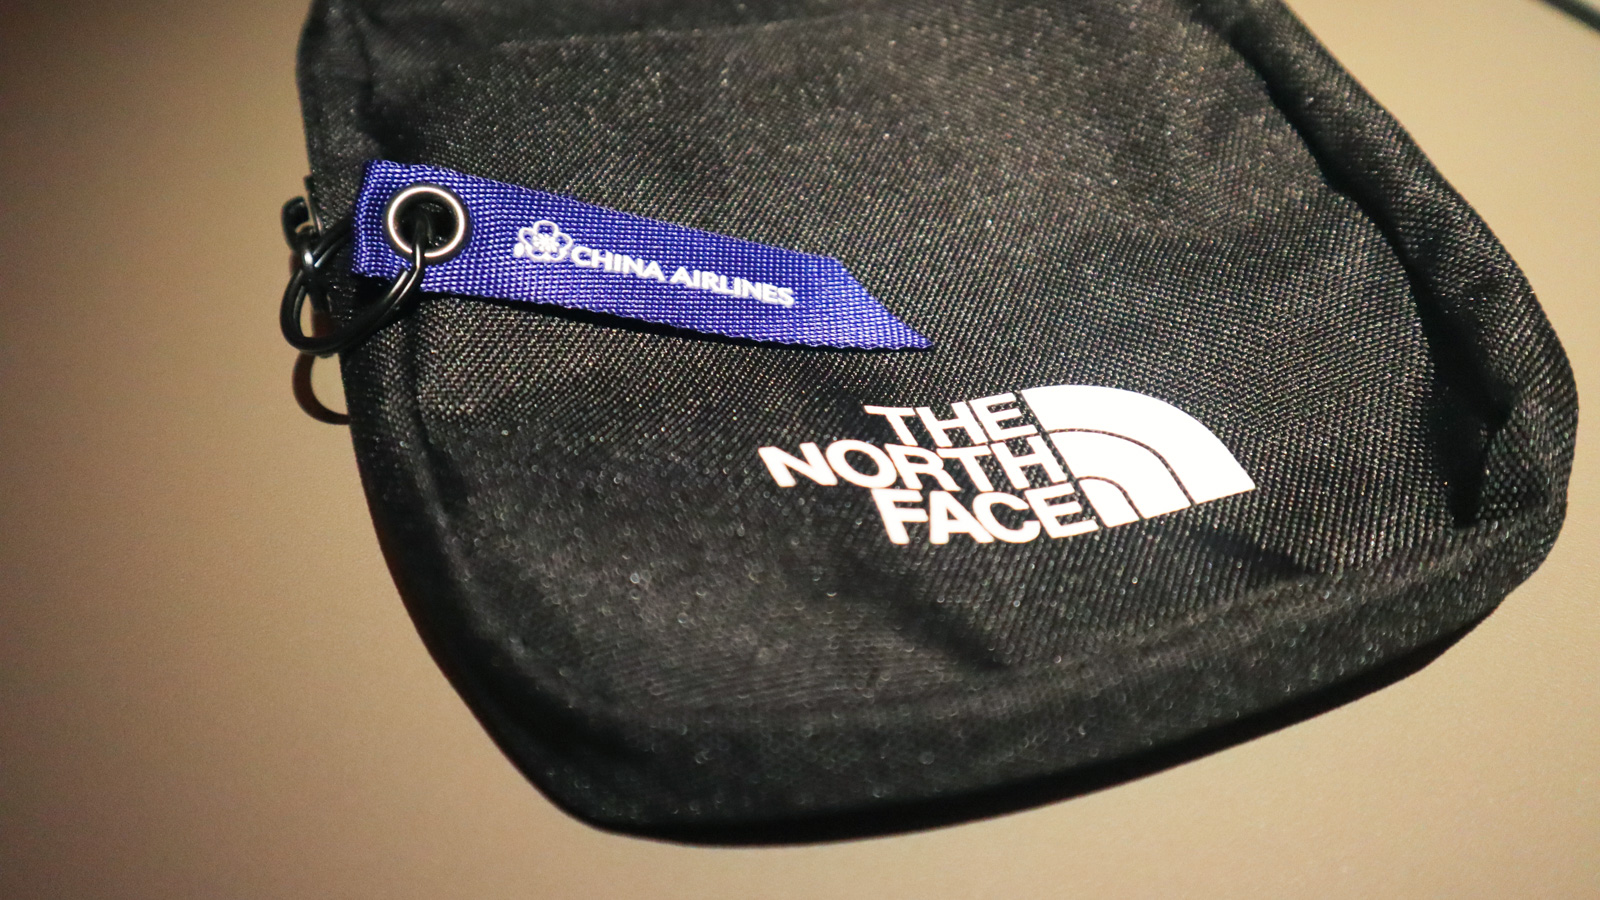 China Airlines & The North Face amenity kit